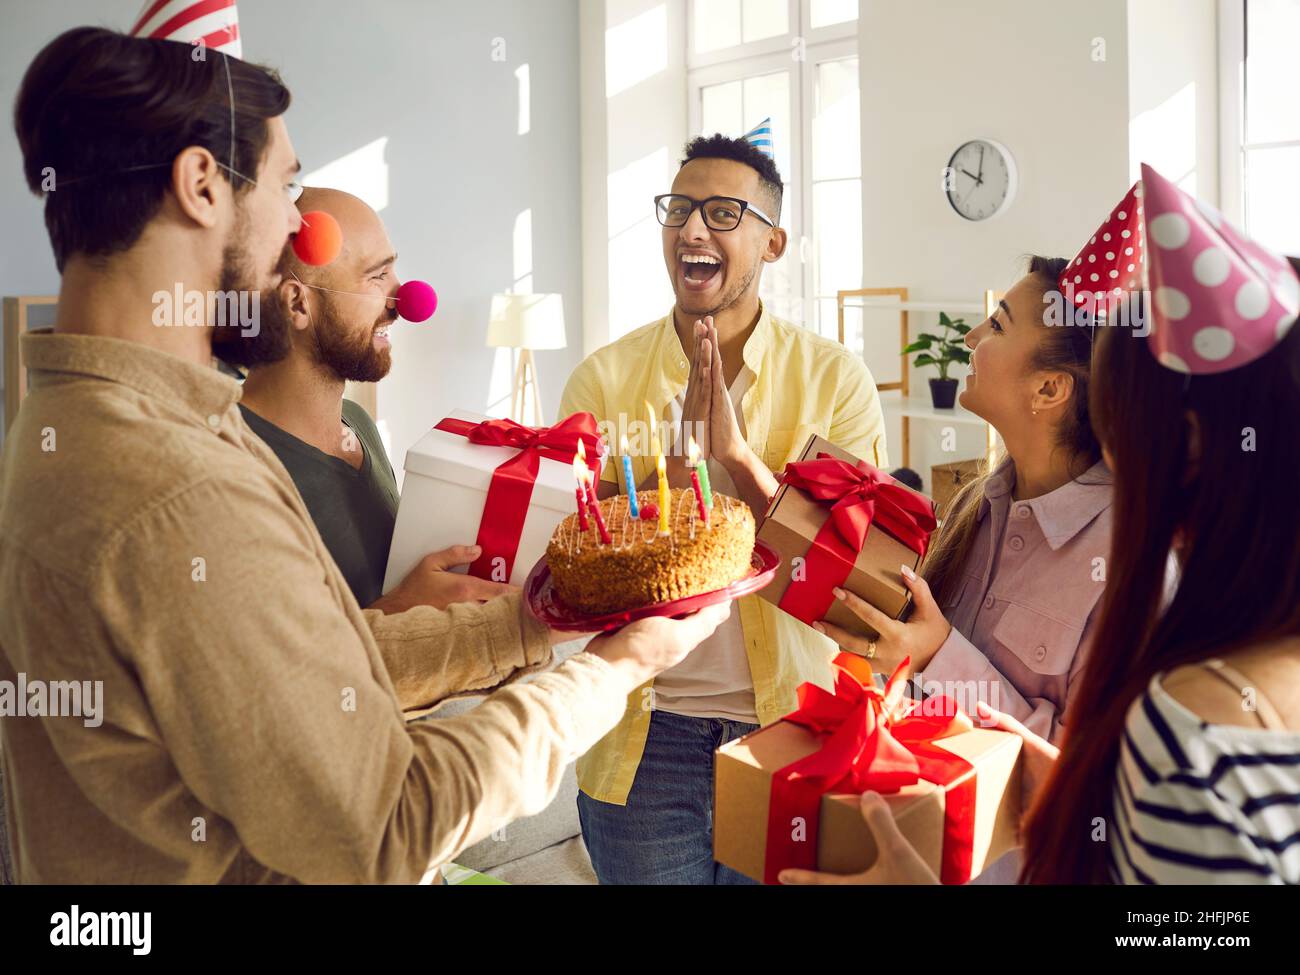 Diverse friends greeting with cake and presents excited mate Stock Photo